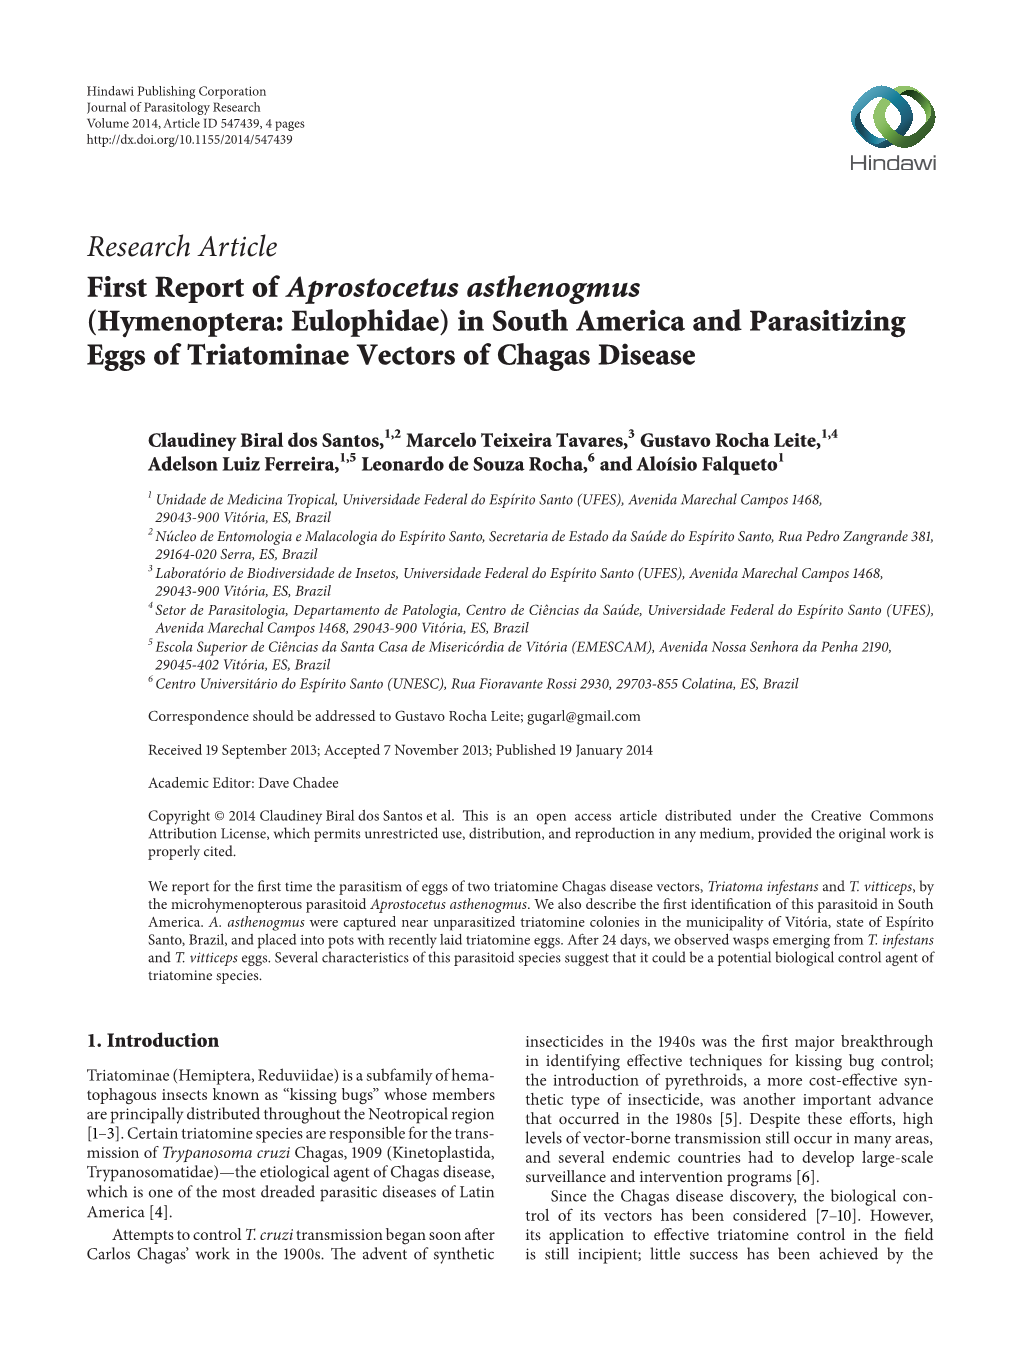 First Report of Aprostocetus Asthenogmus (Hymenoptera: Eulophidae) in South America and Parasitizing Eggs of Triatominae Vectors of Chagas Disease